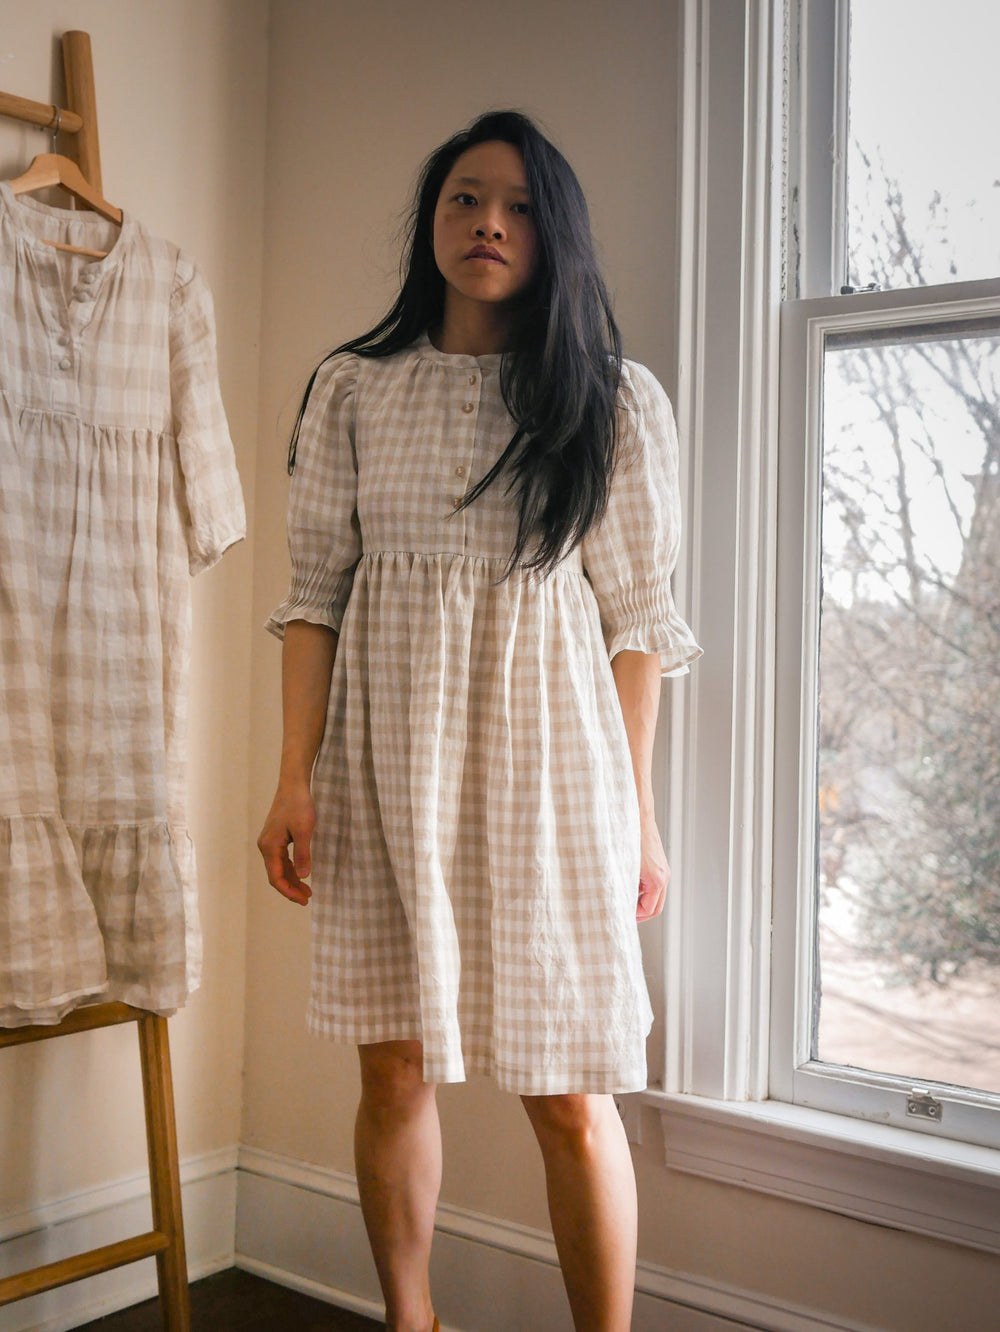 Vivian Shao Chen Orchards Dress Expansion